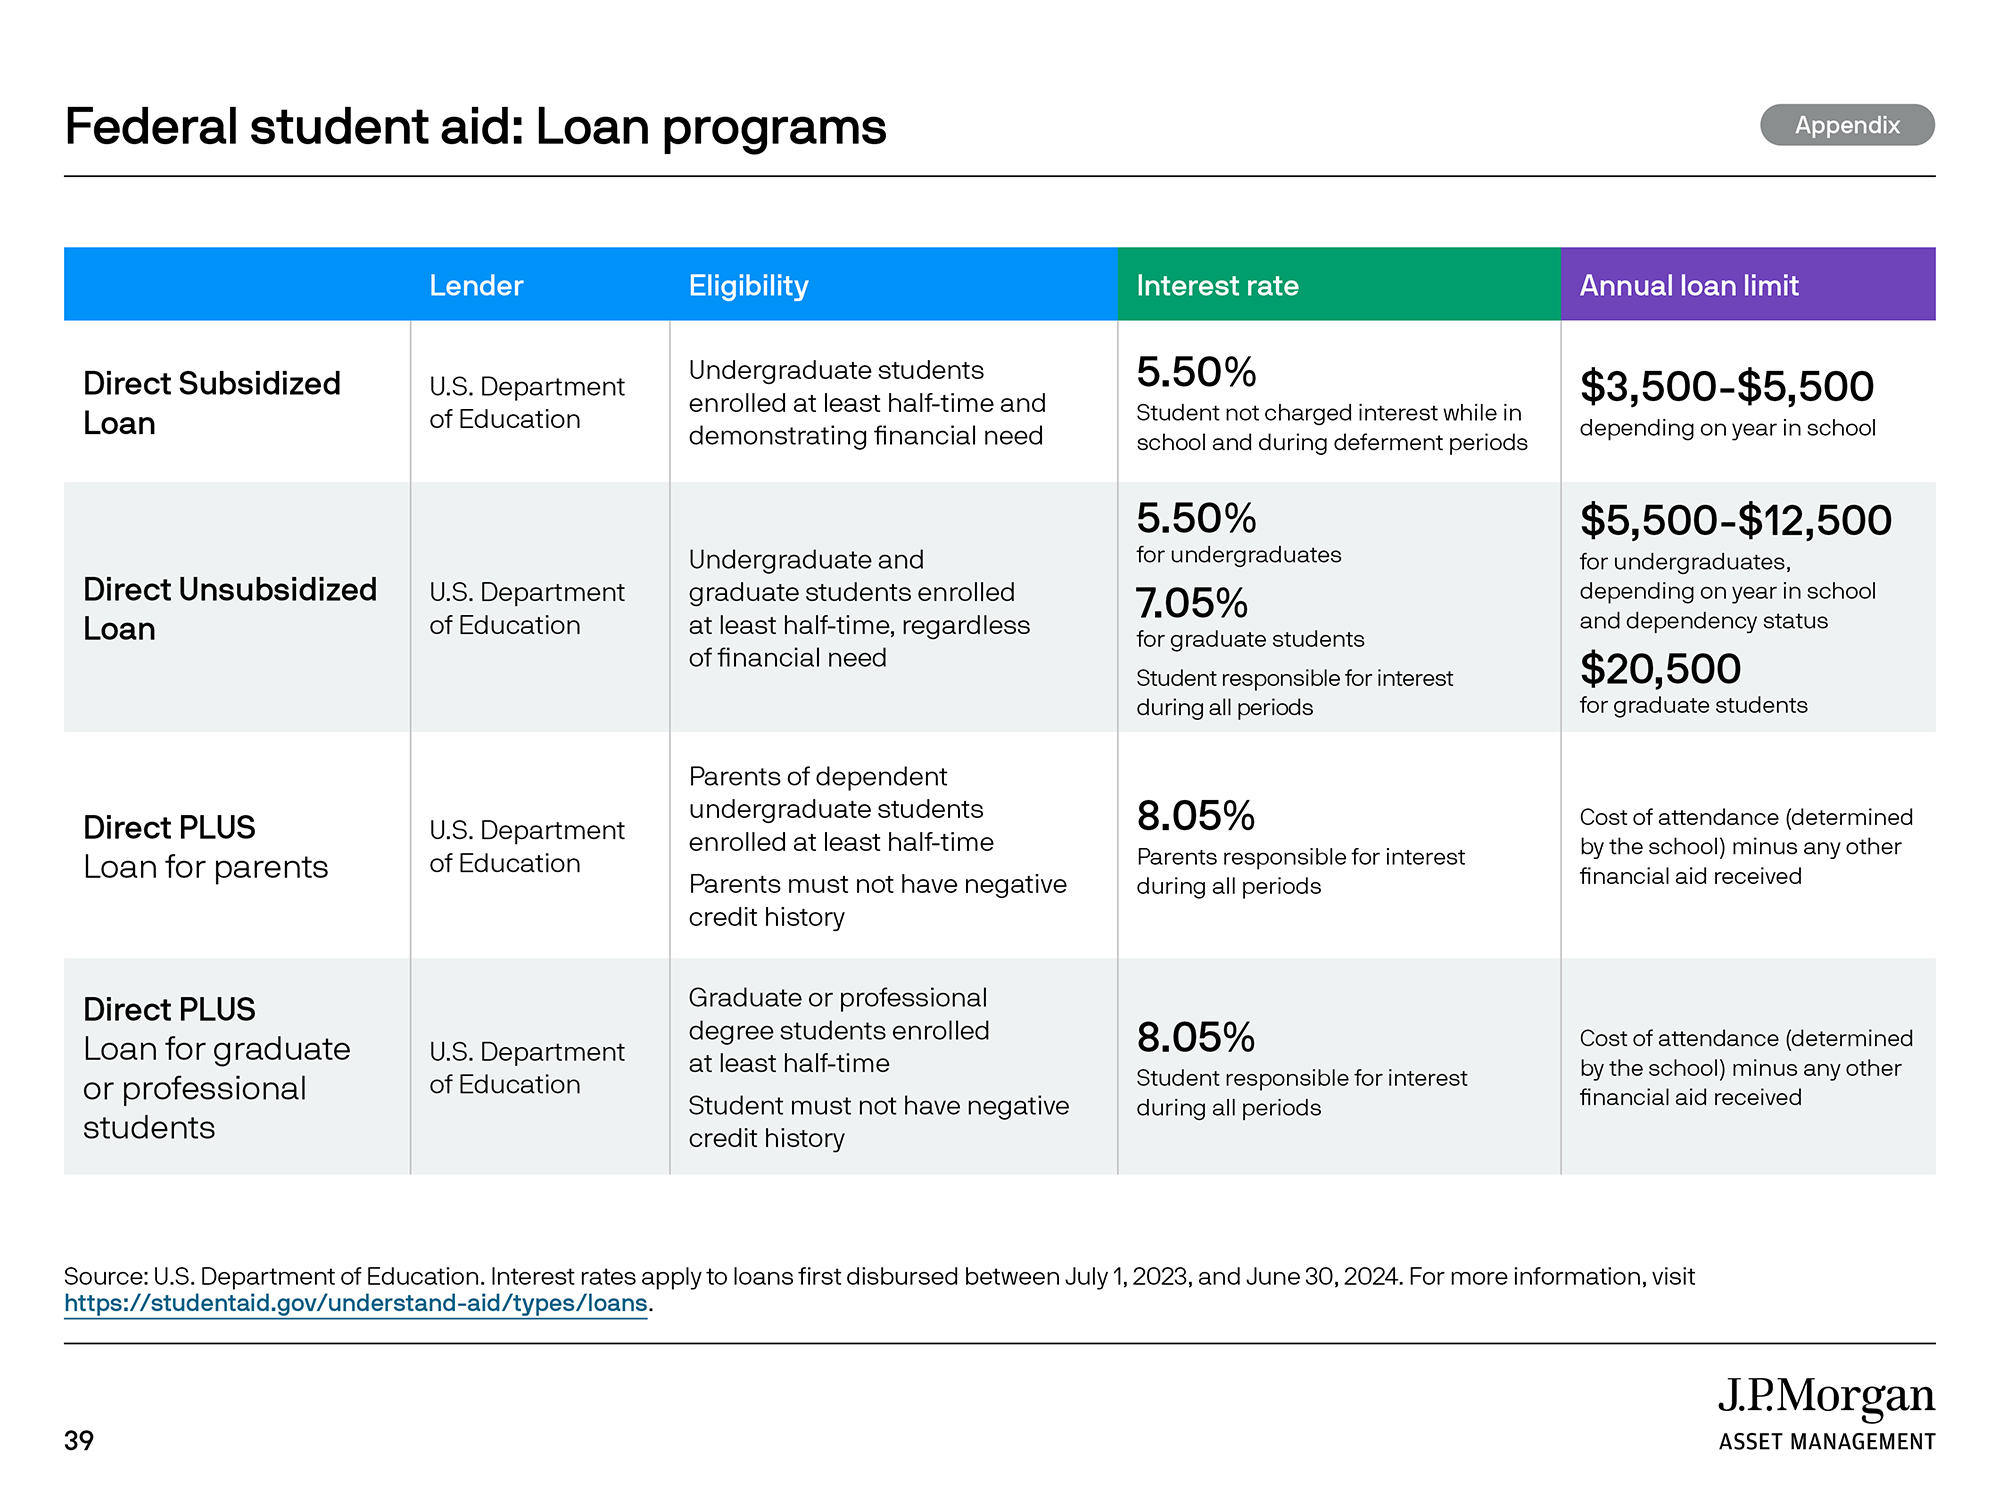 Federal student aid: Loan programs